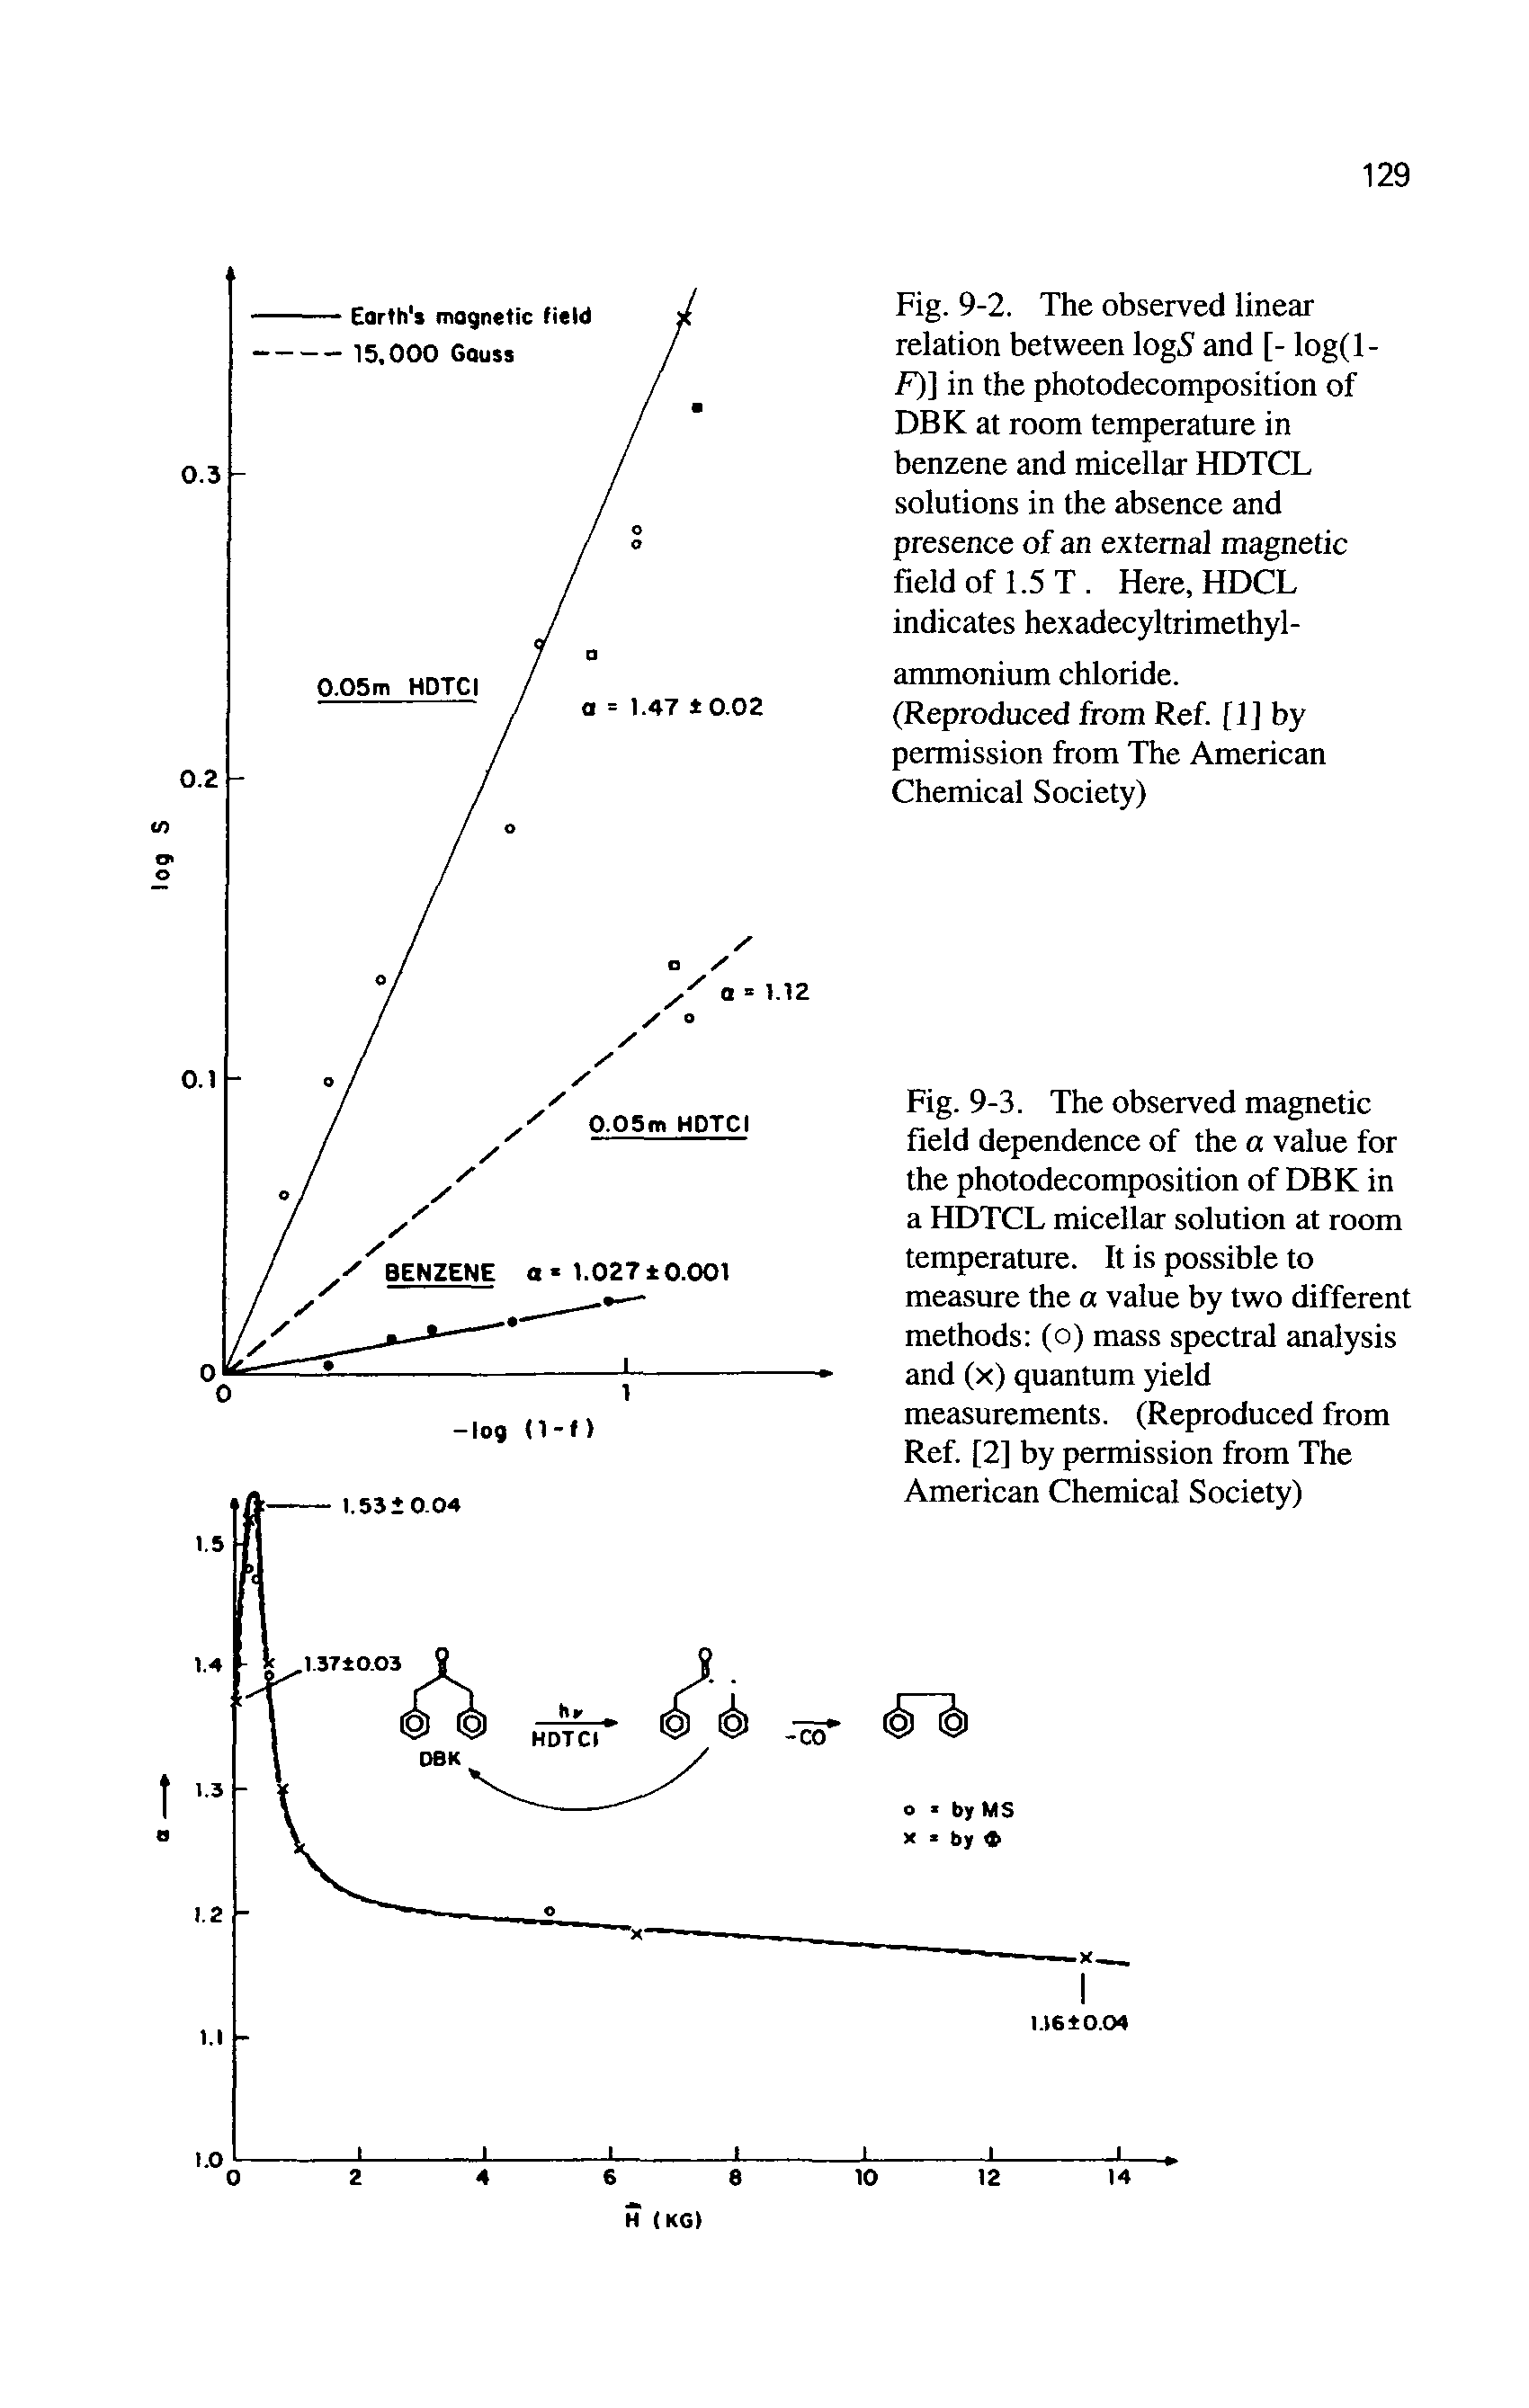 Fig. 9-3. The observed magnetic field dependence of the a value for the photodecomposition of DBK in a HDTCL micellar solution at room temperature. It is possible to measure the a value by two different methods (o) mass spectral analysis and (x) quantum yield measurements. (Reproduced from Ref. [2] by permission from The...